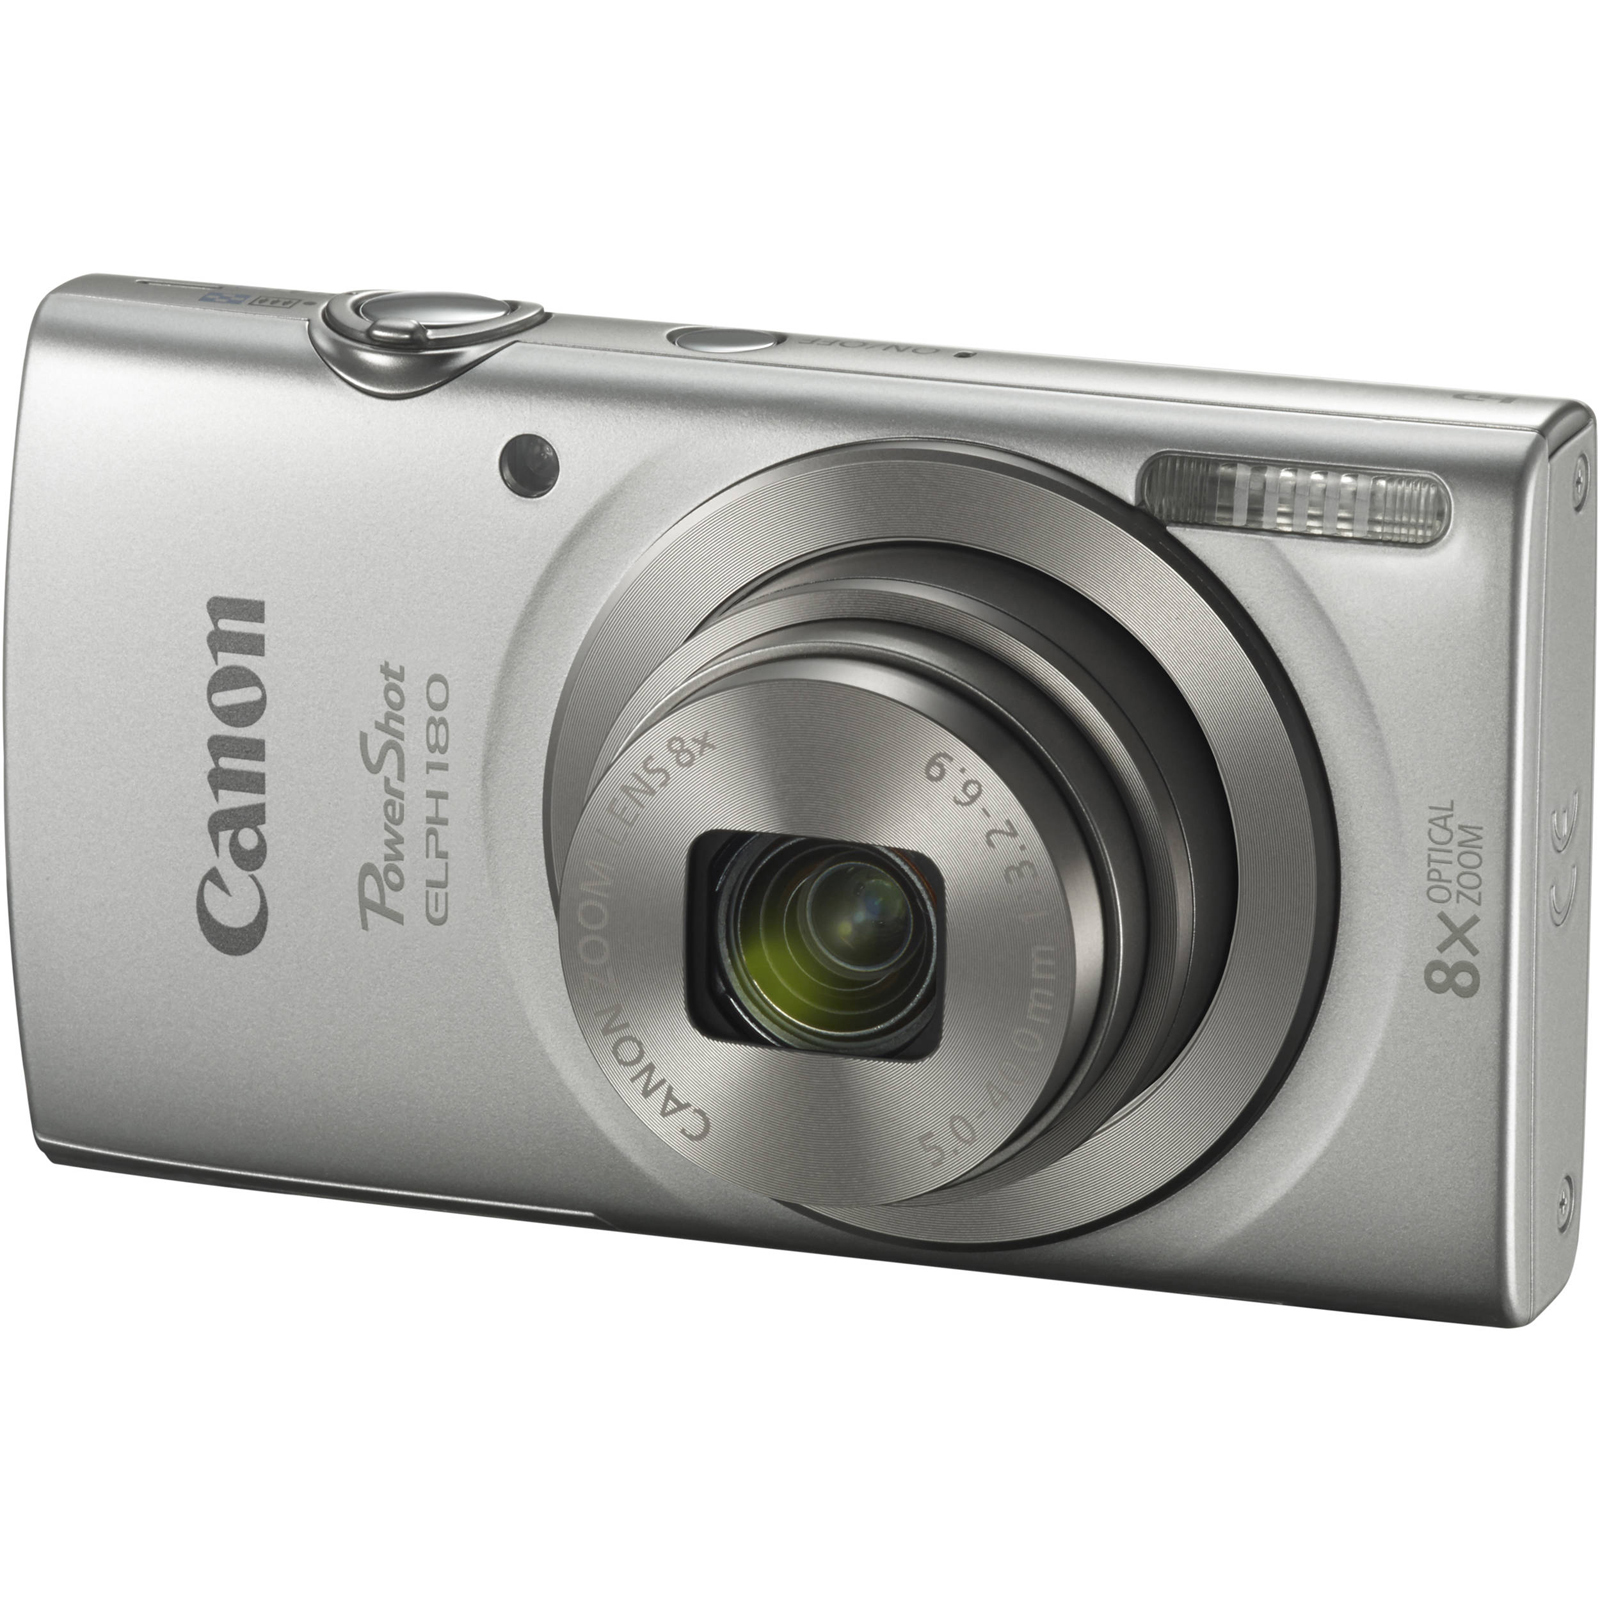 Canon Powershot Elph 180 Silver Camera - image 1 of 8